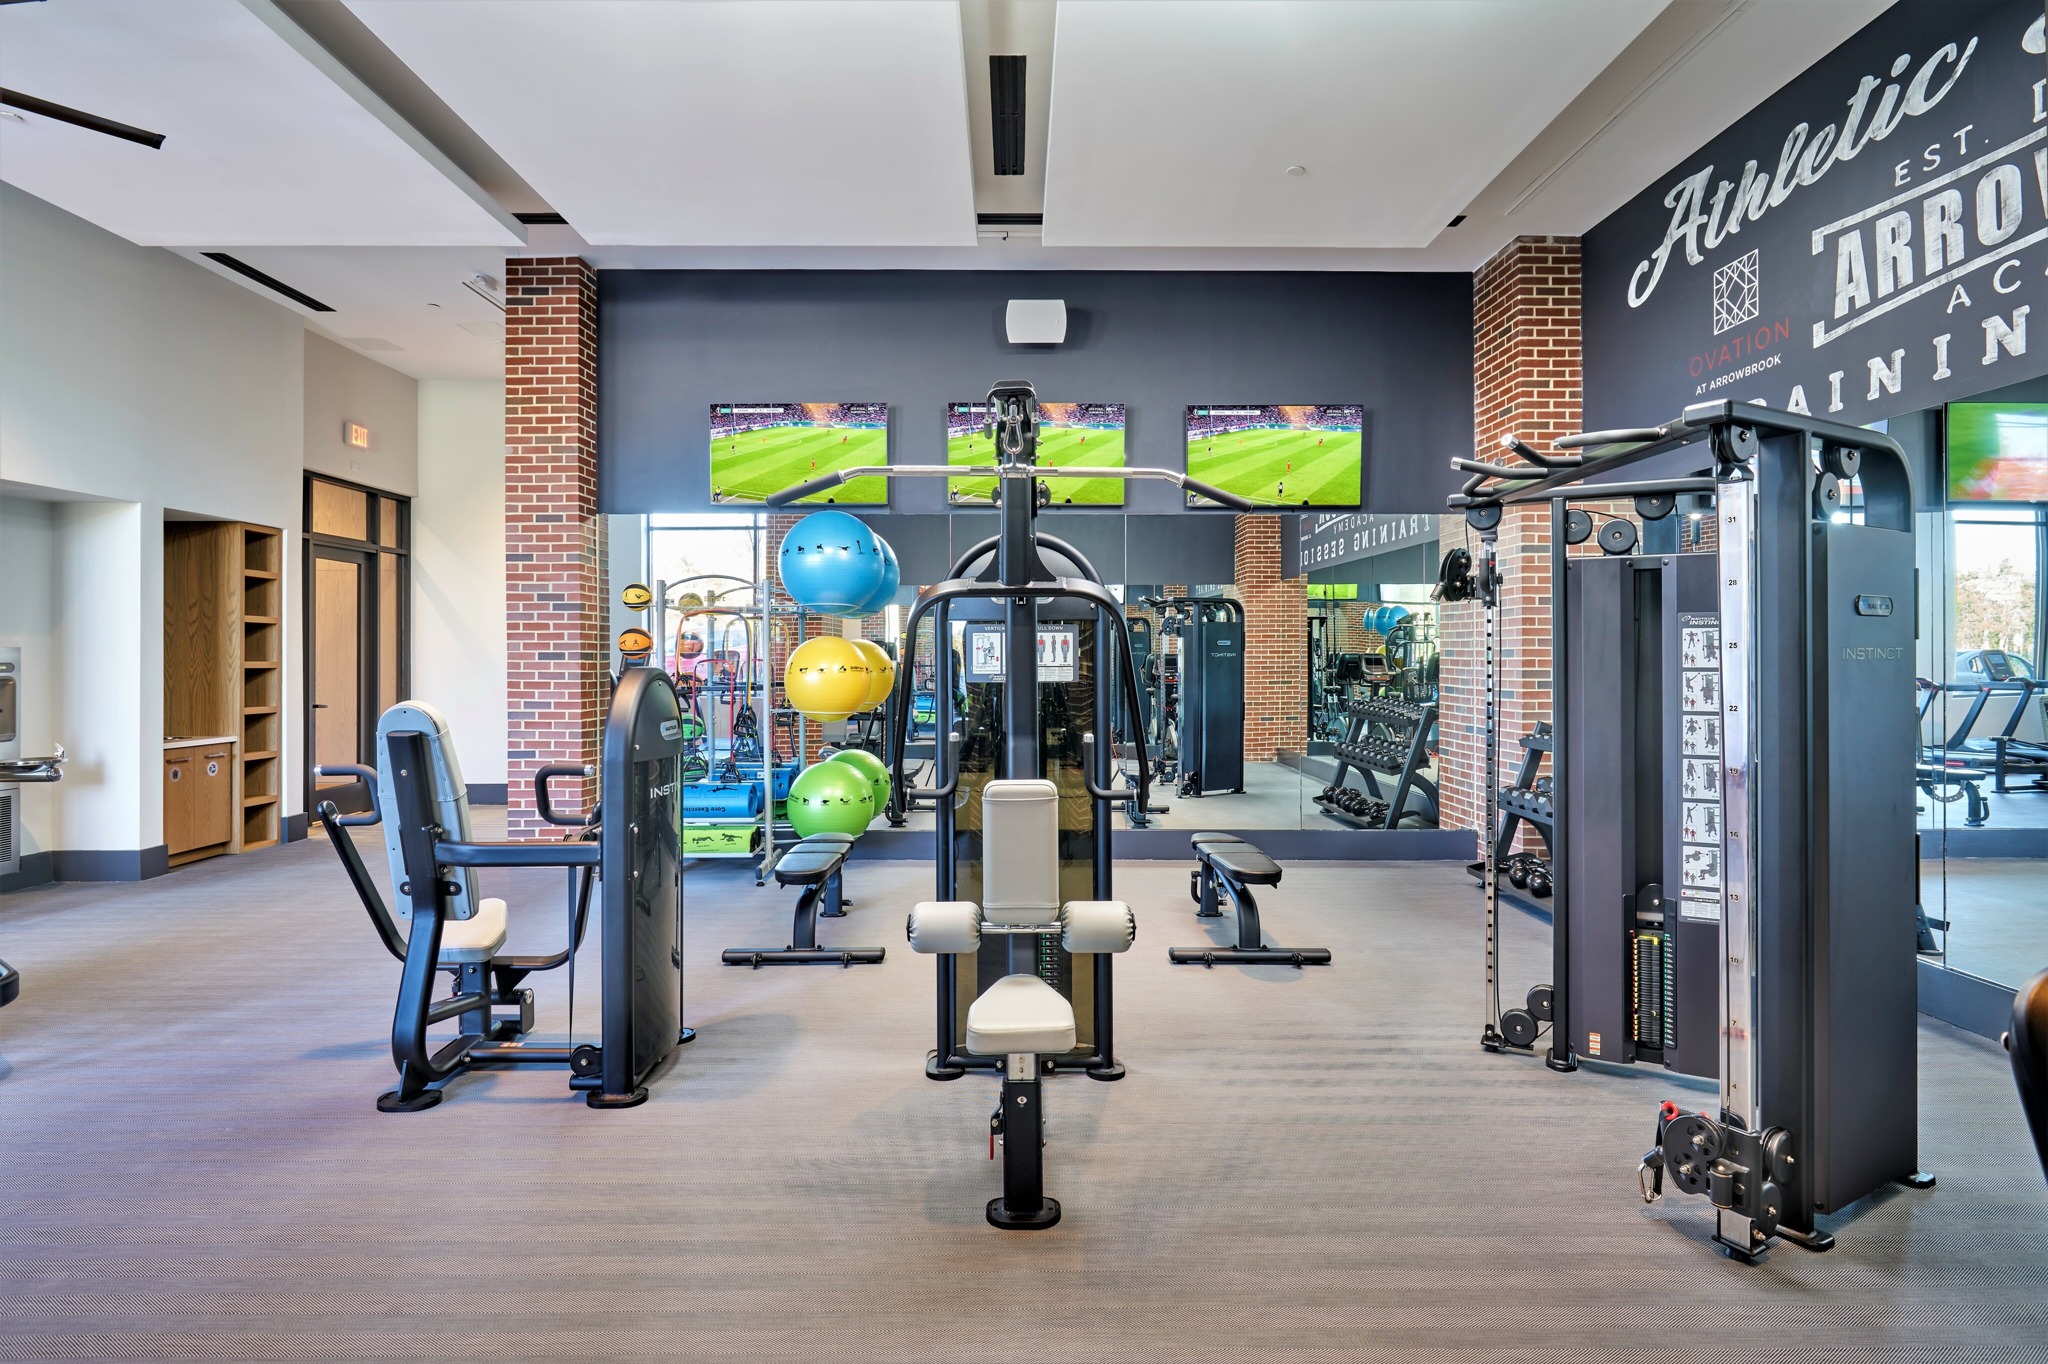 Image of the Fitness Center | Ovation at Arrowbrook | Affordable Herndon VA Apartments